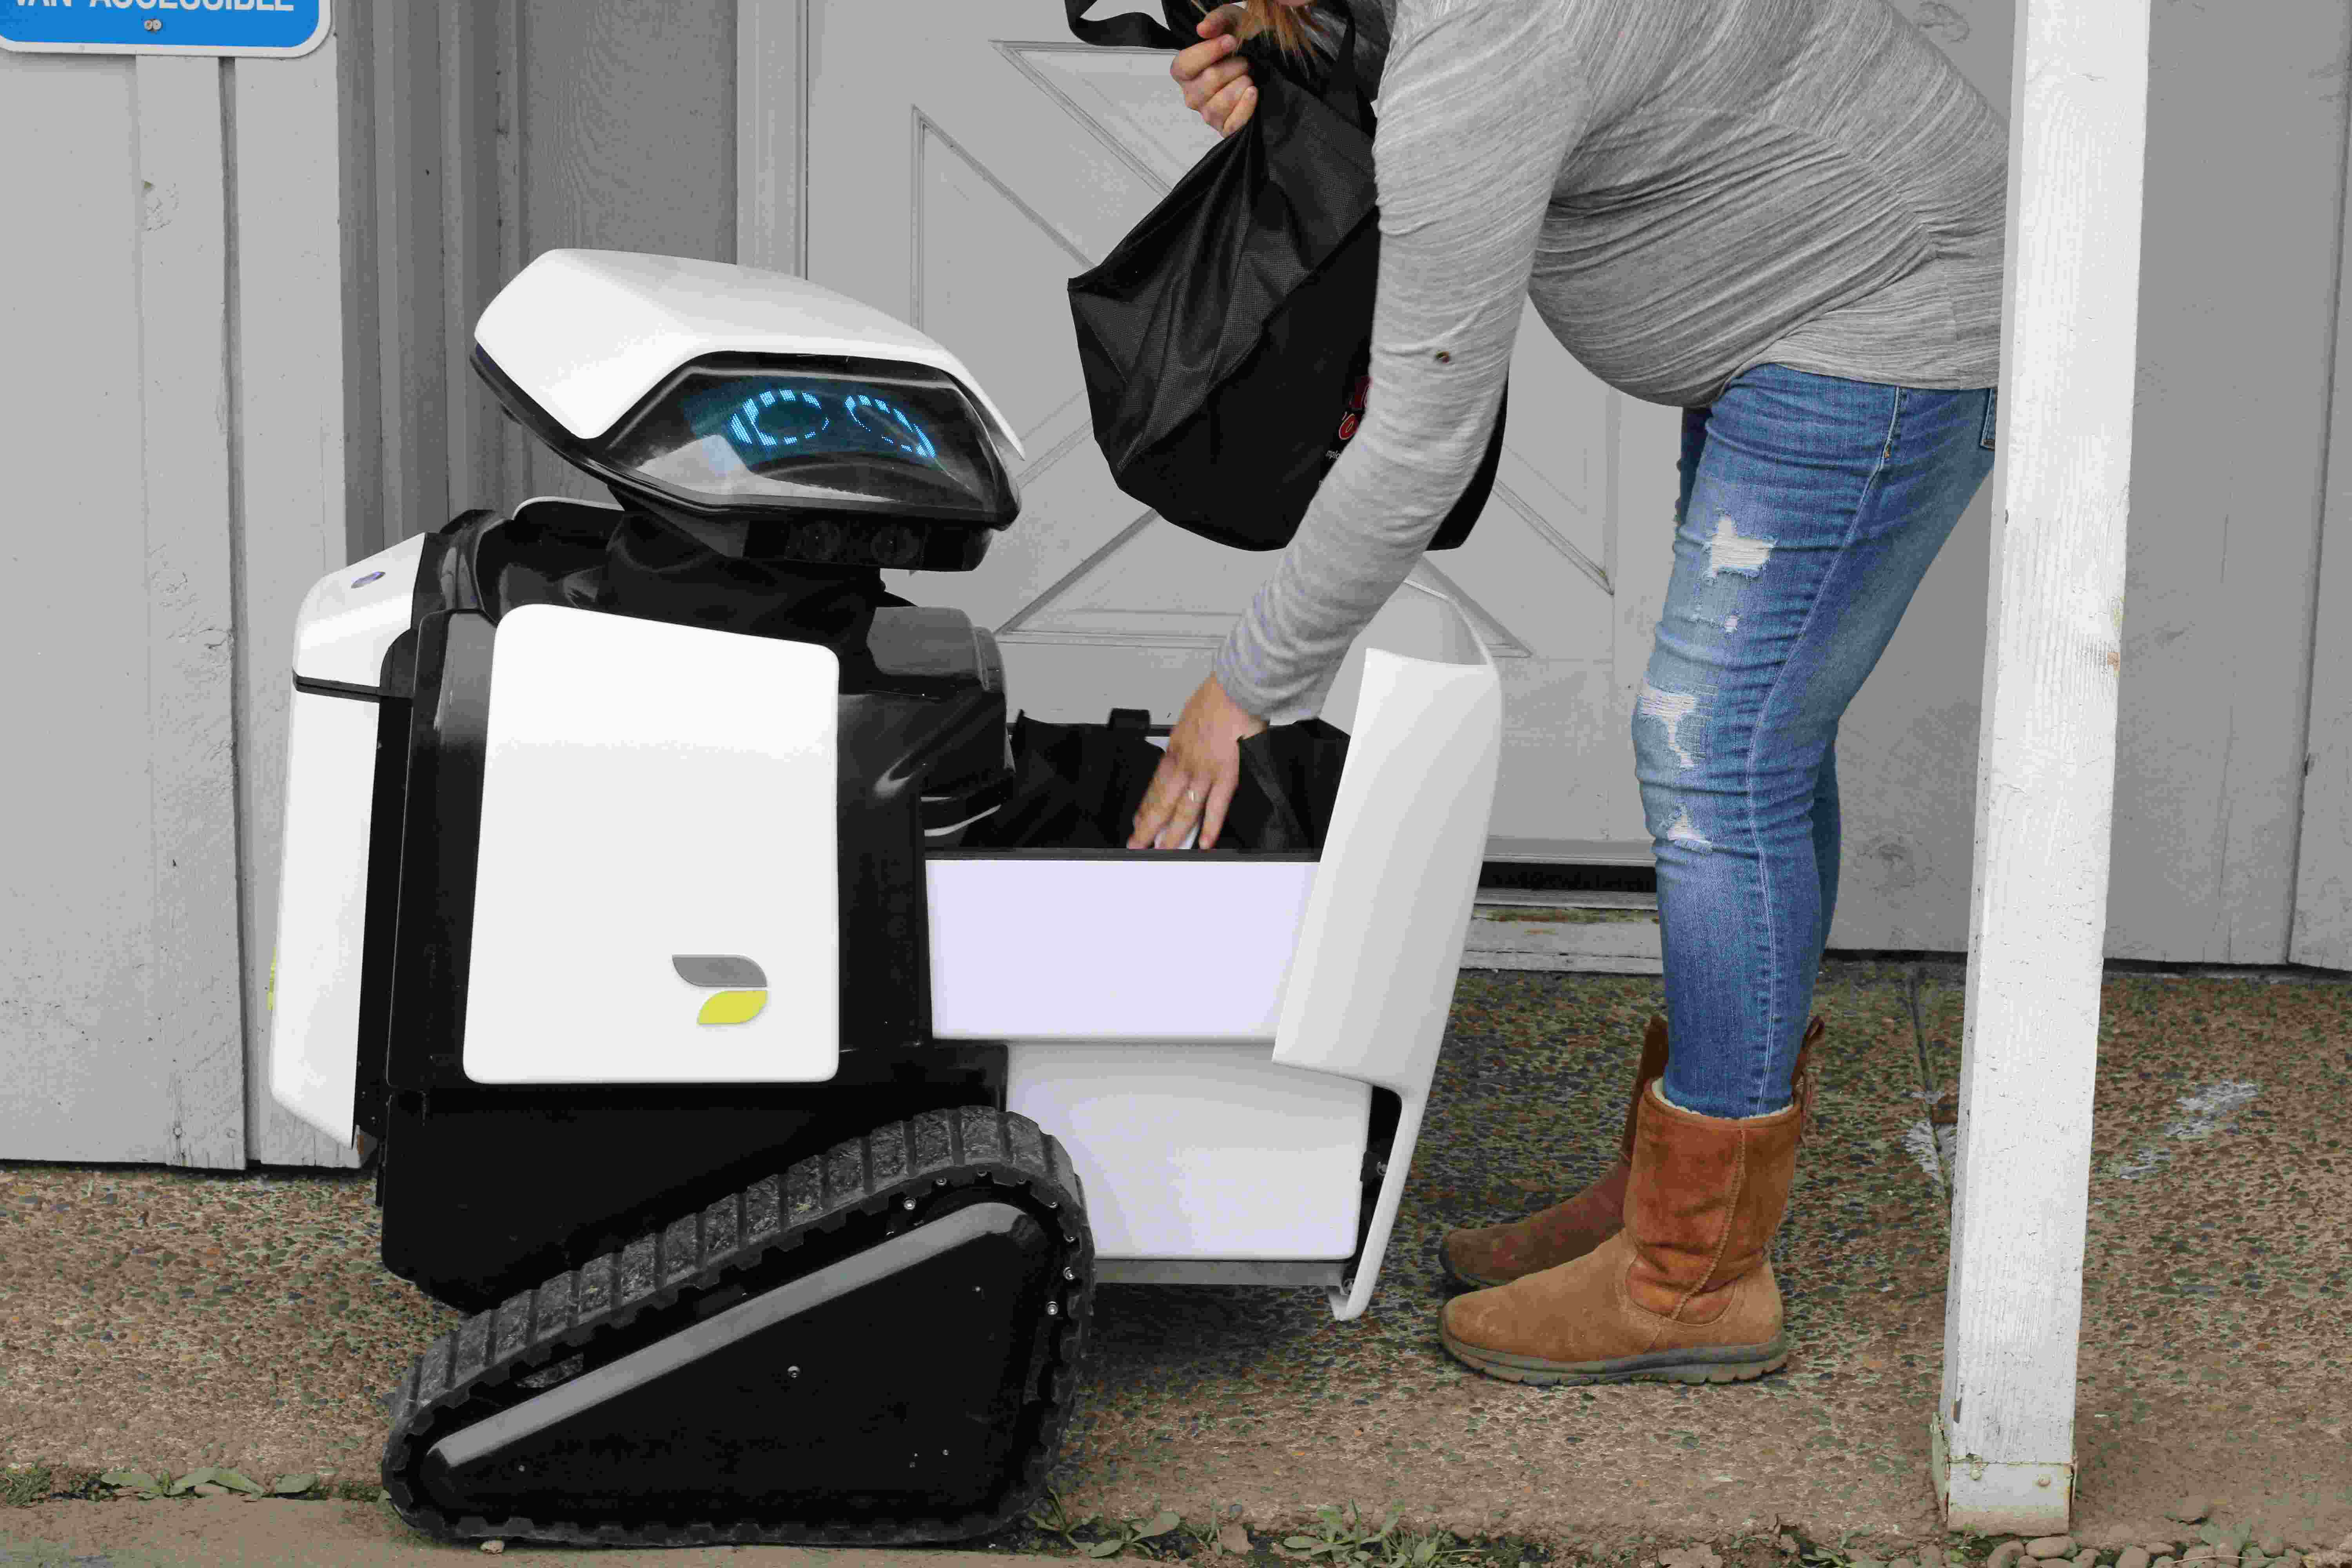 Images Wikimedia Commons/31 Lizzythetech Woman_Takes_Groceries_from_Dax_Delivery_Robot.jpg